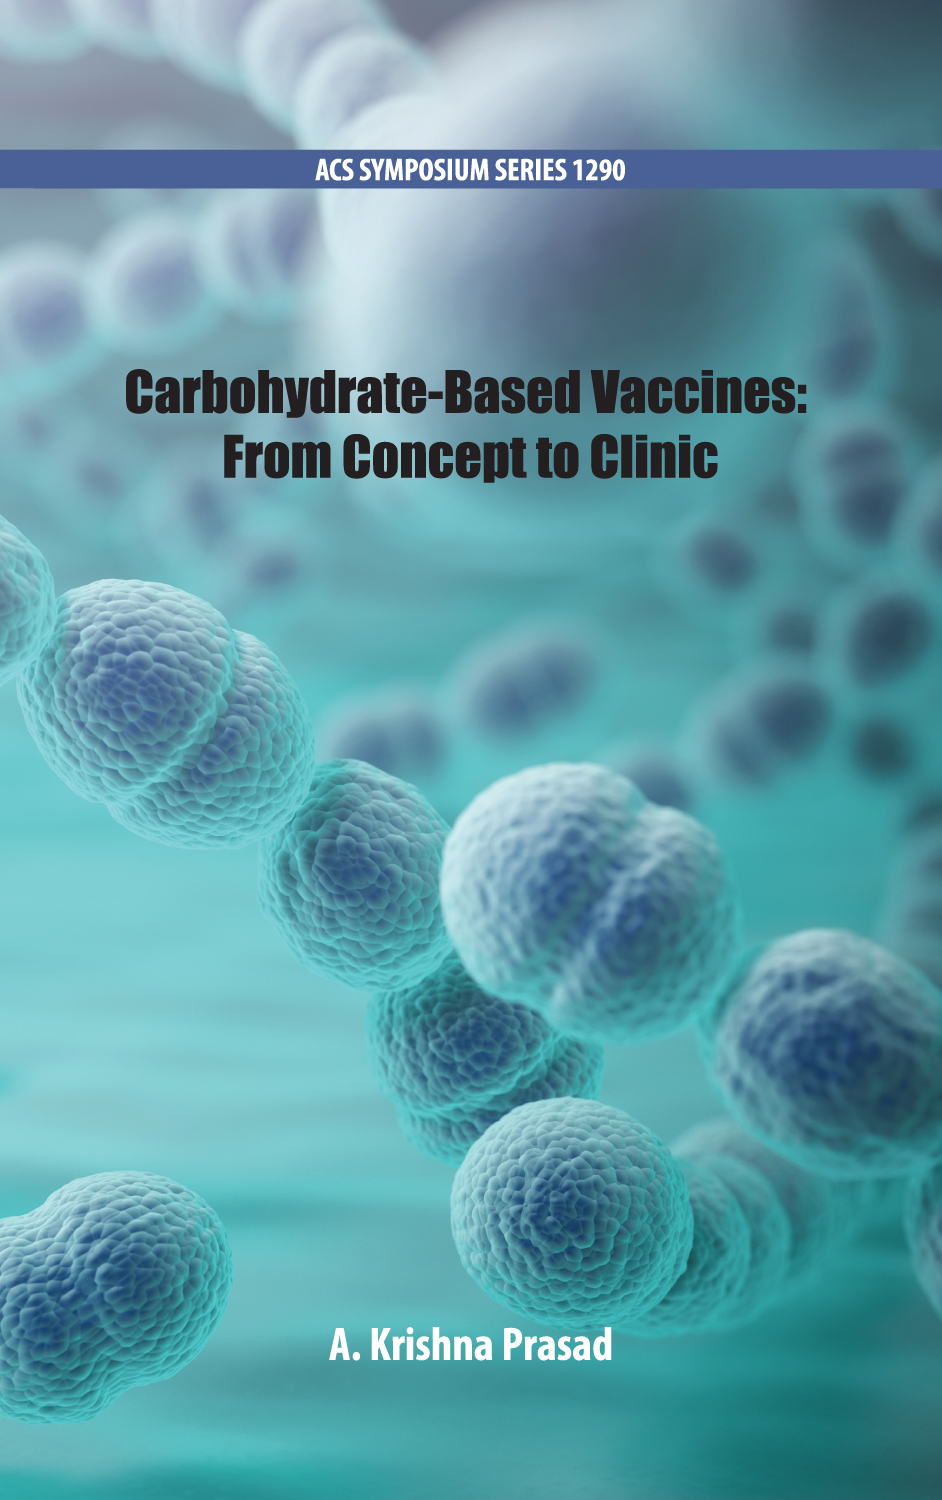 Carbohydrate-Based Vaccines: From Concept to Clinic image